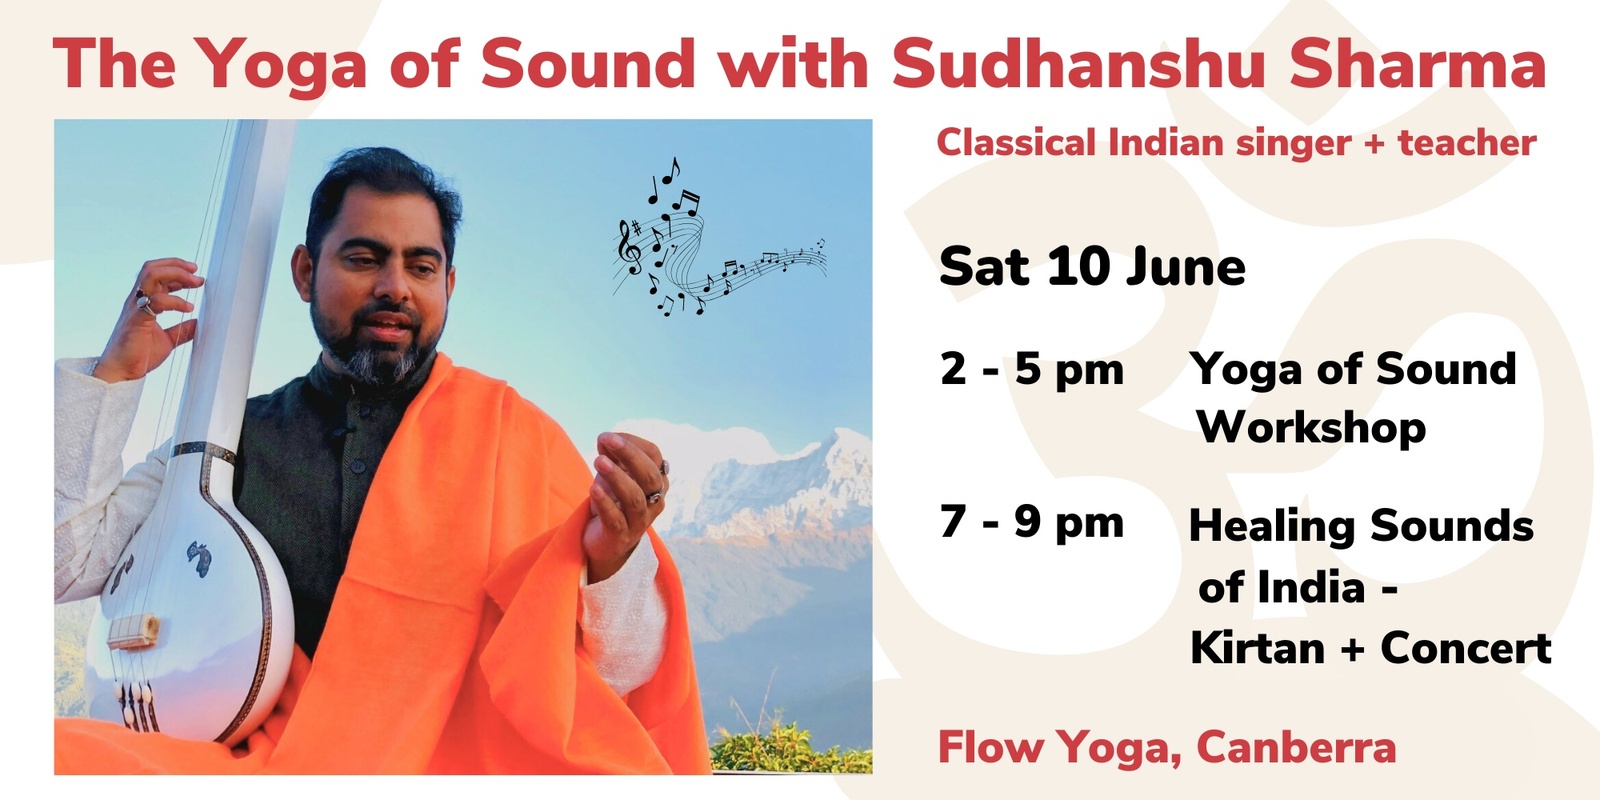 The Yoga Of Sound with Sudhanshu Sharma - Canberra